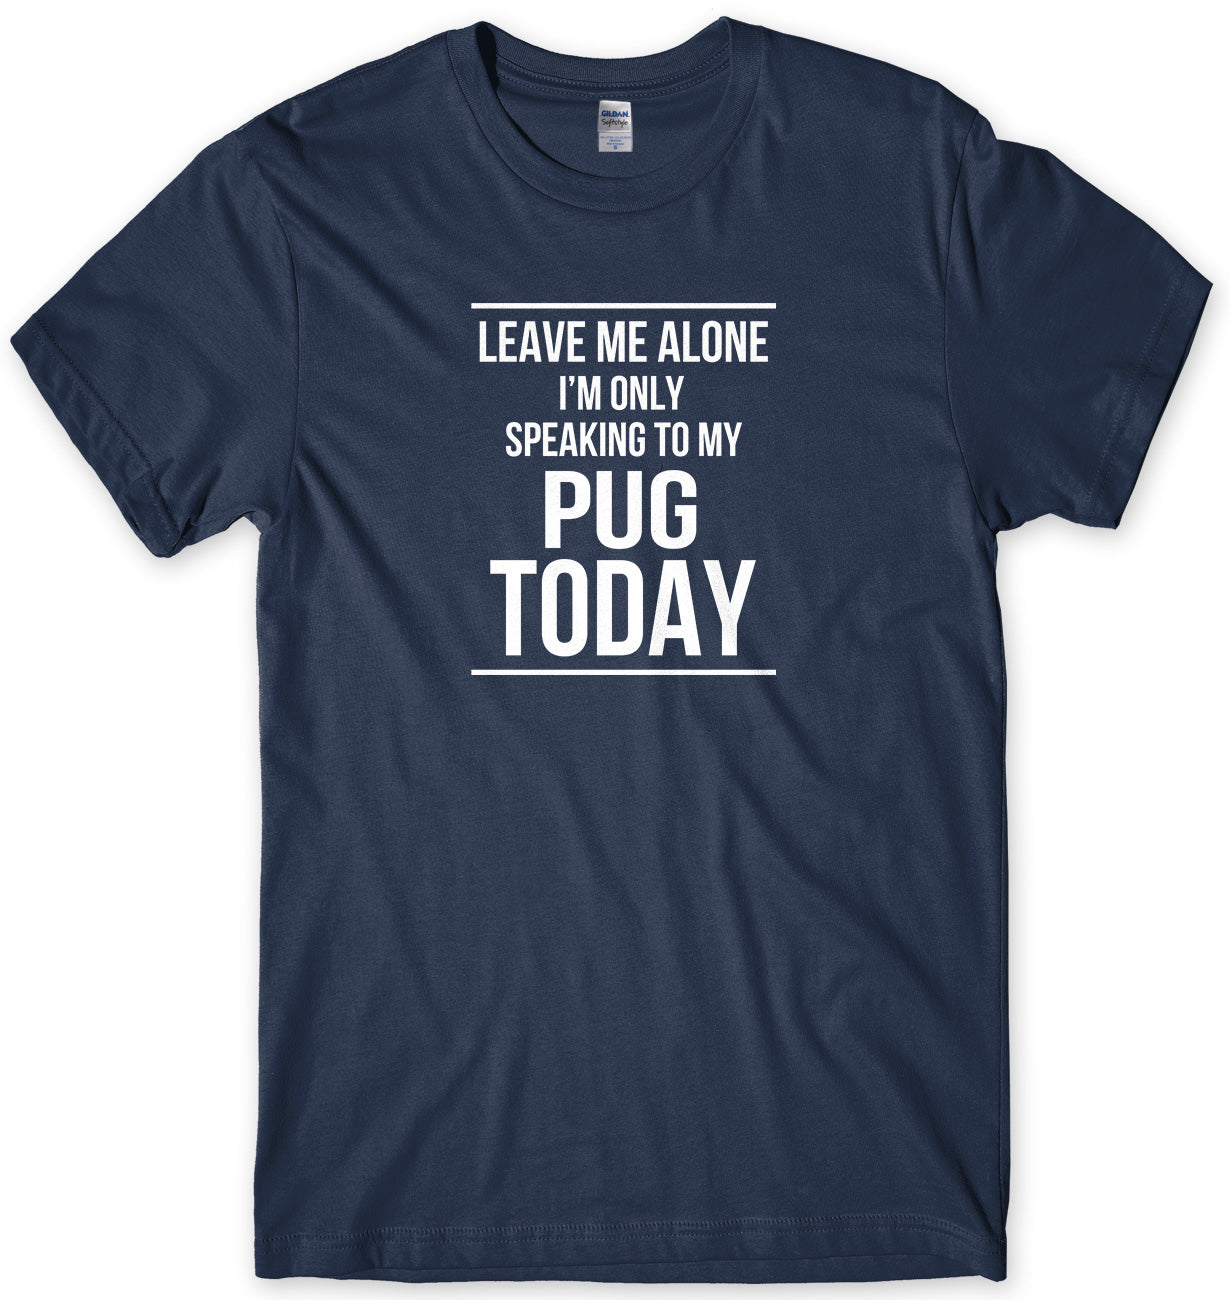 LEAVE ME ALONE I'M ONLY SPEAKING TO MY PUG TODAY MENS FUNNY SLOGAN UNISEX T-SHIRT